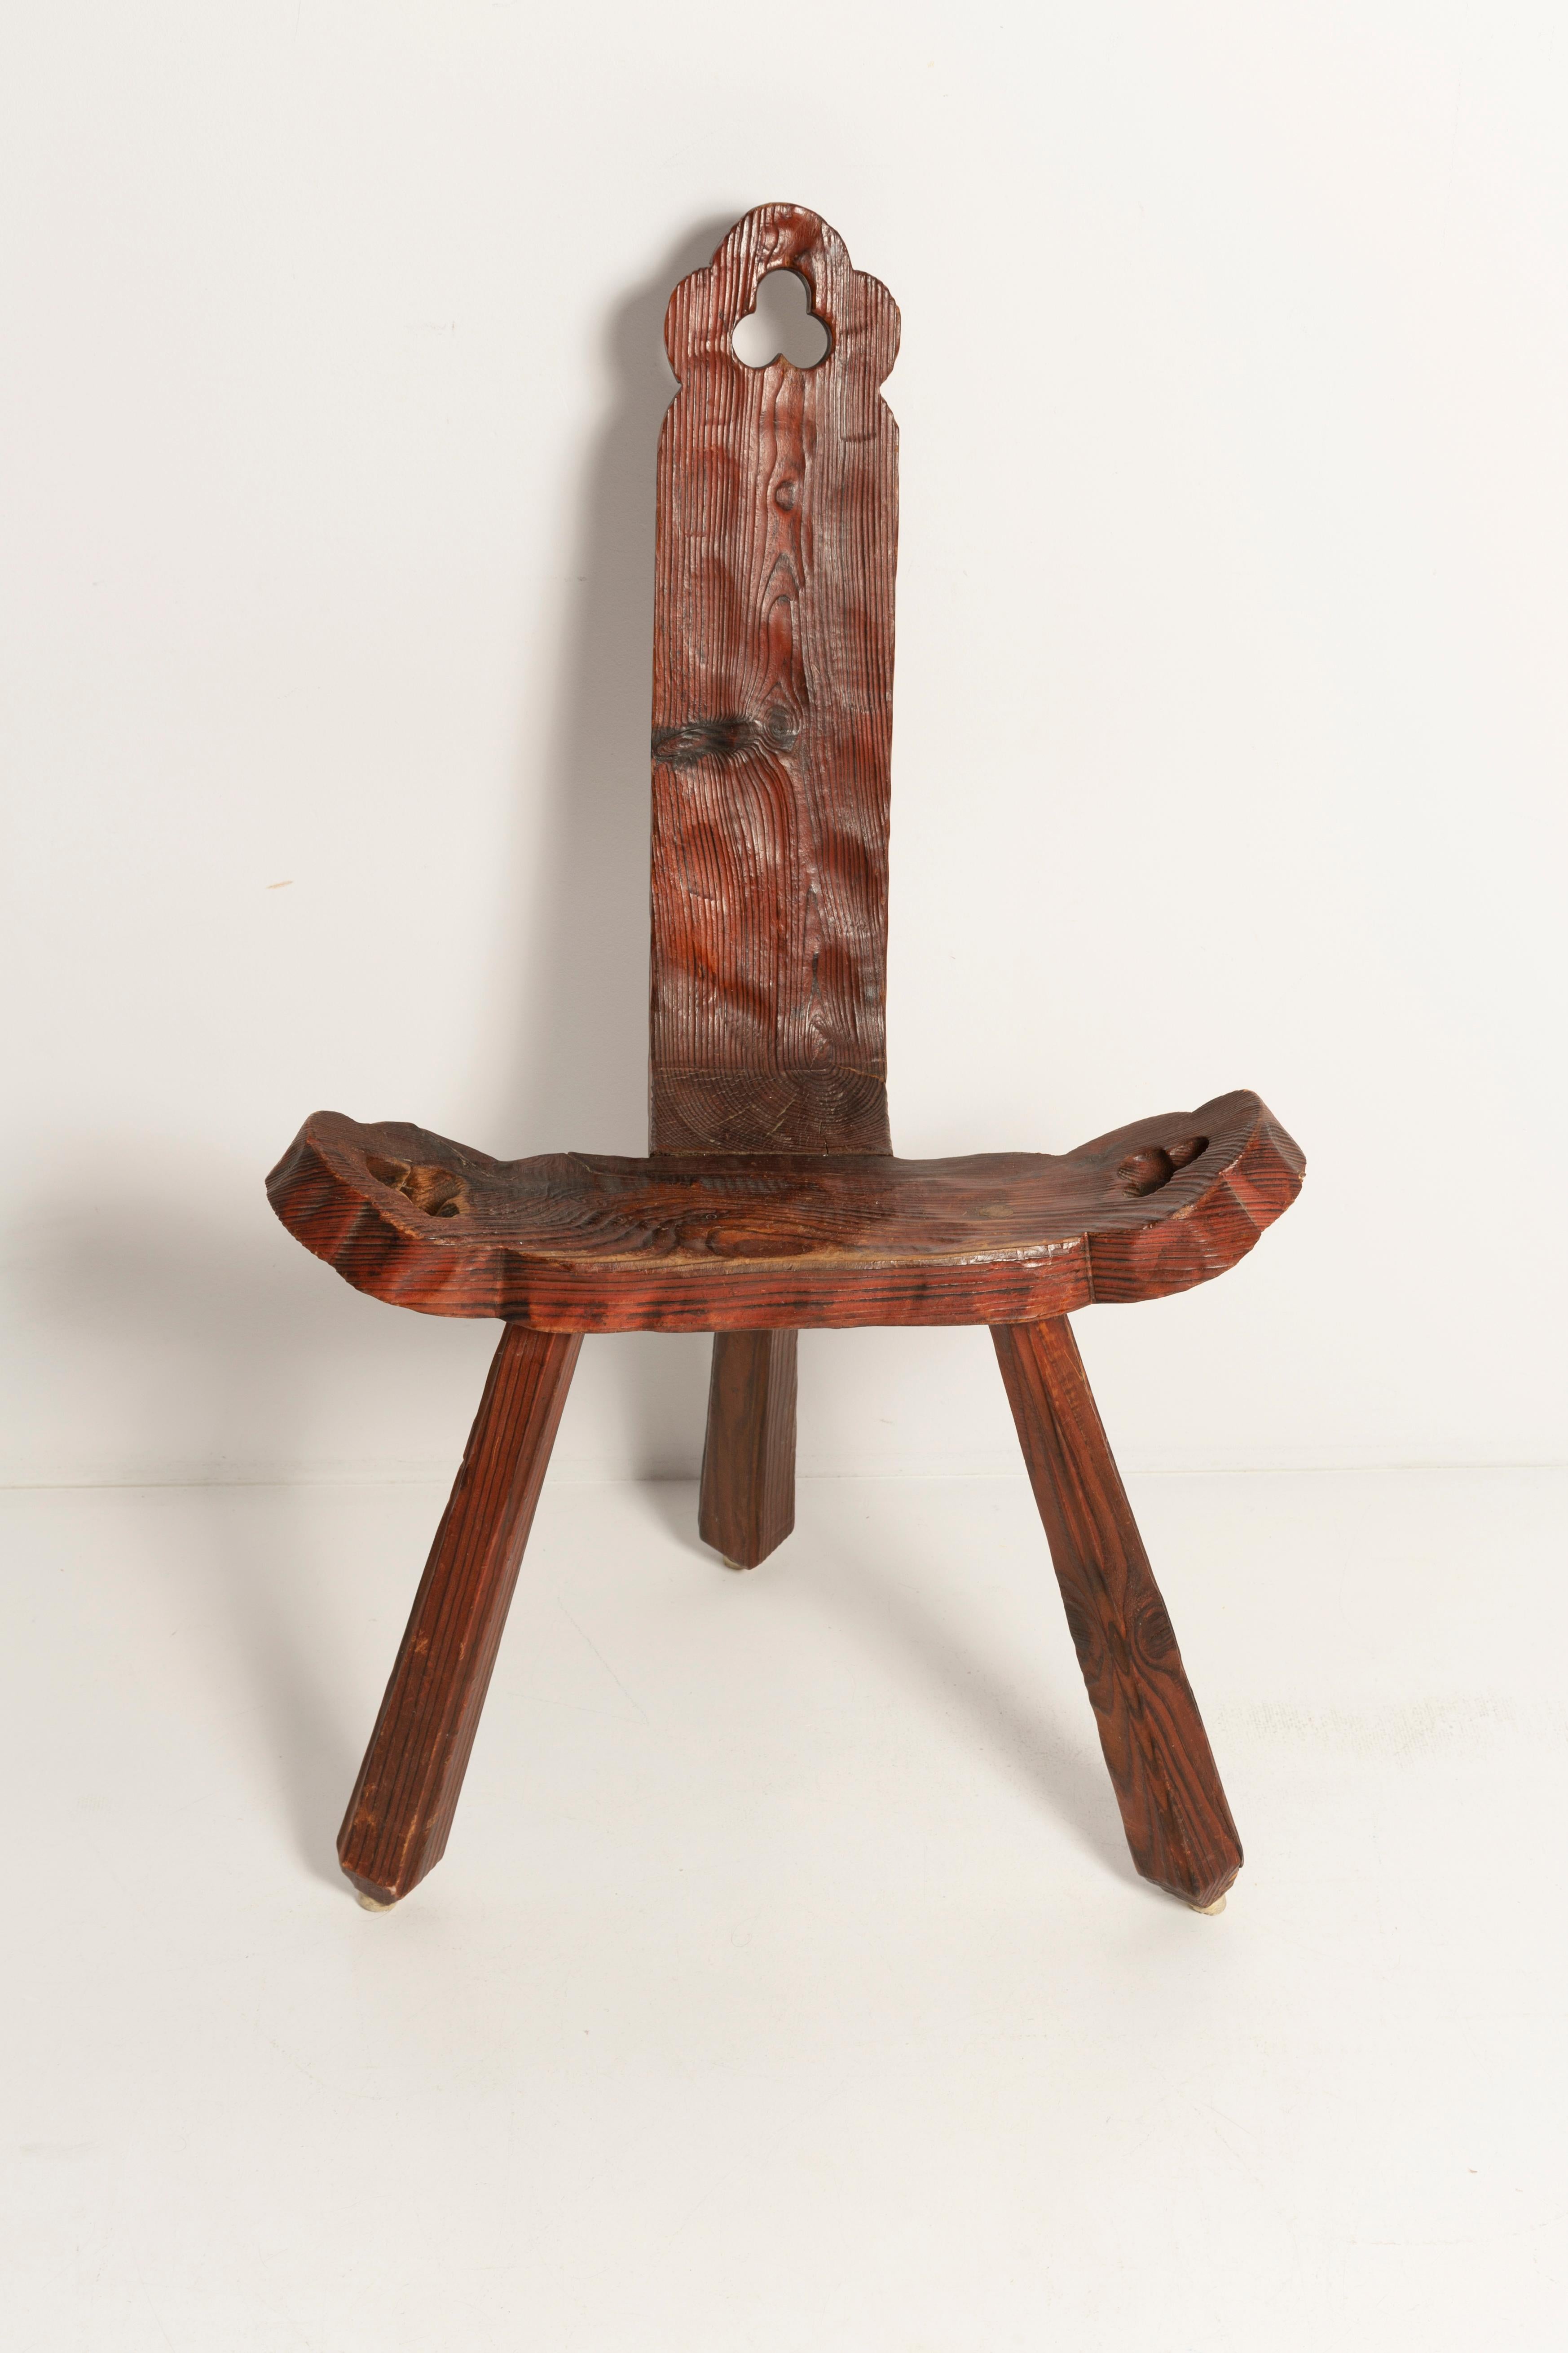 Hand-Crafted Midcentury Handmade Vintage Chair, Wood, France, 1960